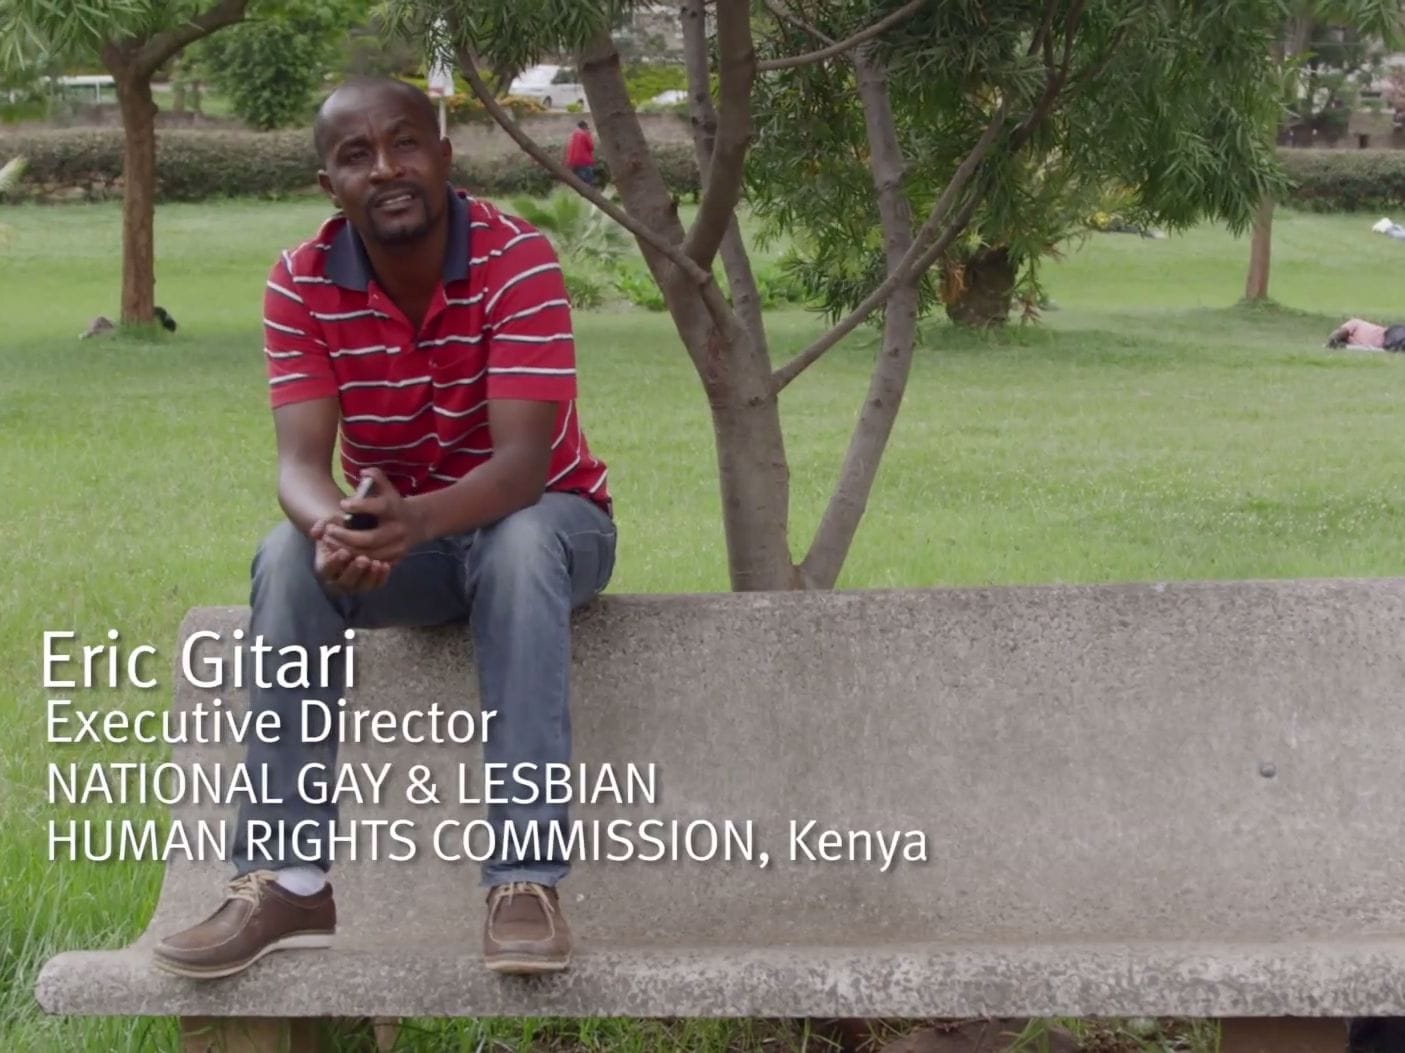 "The National Gay and Lesbian Human Rights Commission seeks to carry out basic human rights work, such as standing up for LGBT people who have been victims of violence," said Eric Gitari, executive director of NGLHRC. , Human Rights Watch/Video